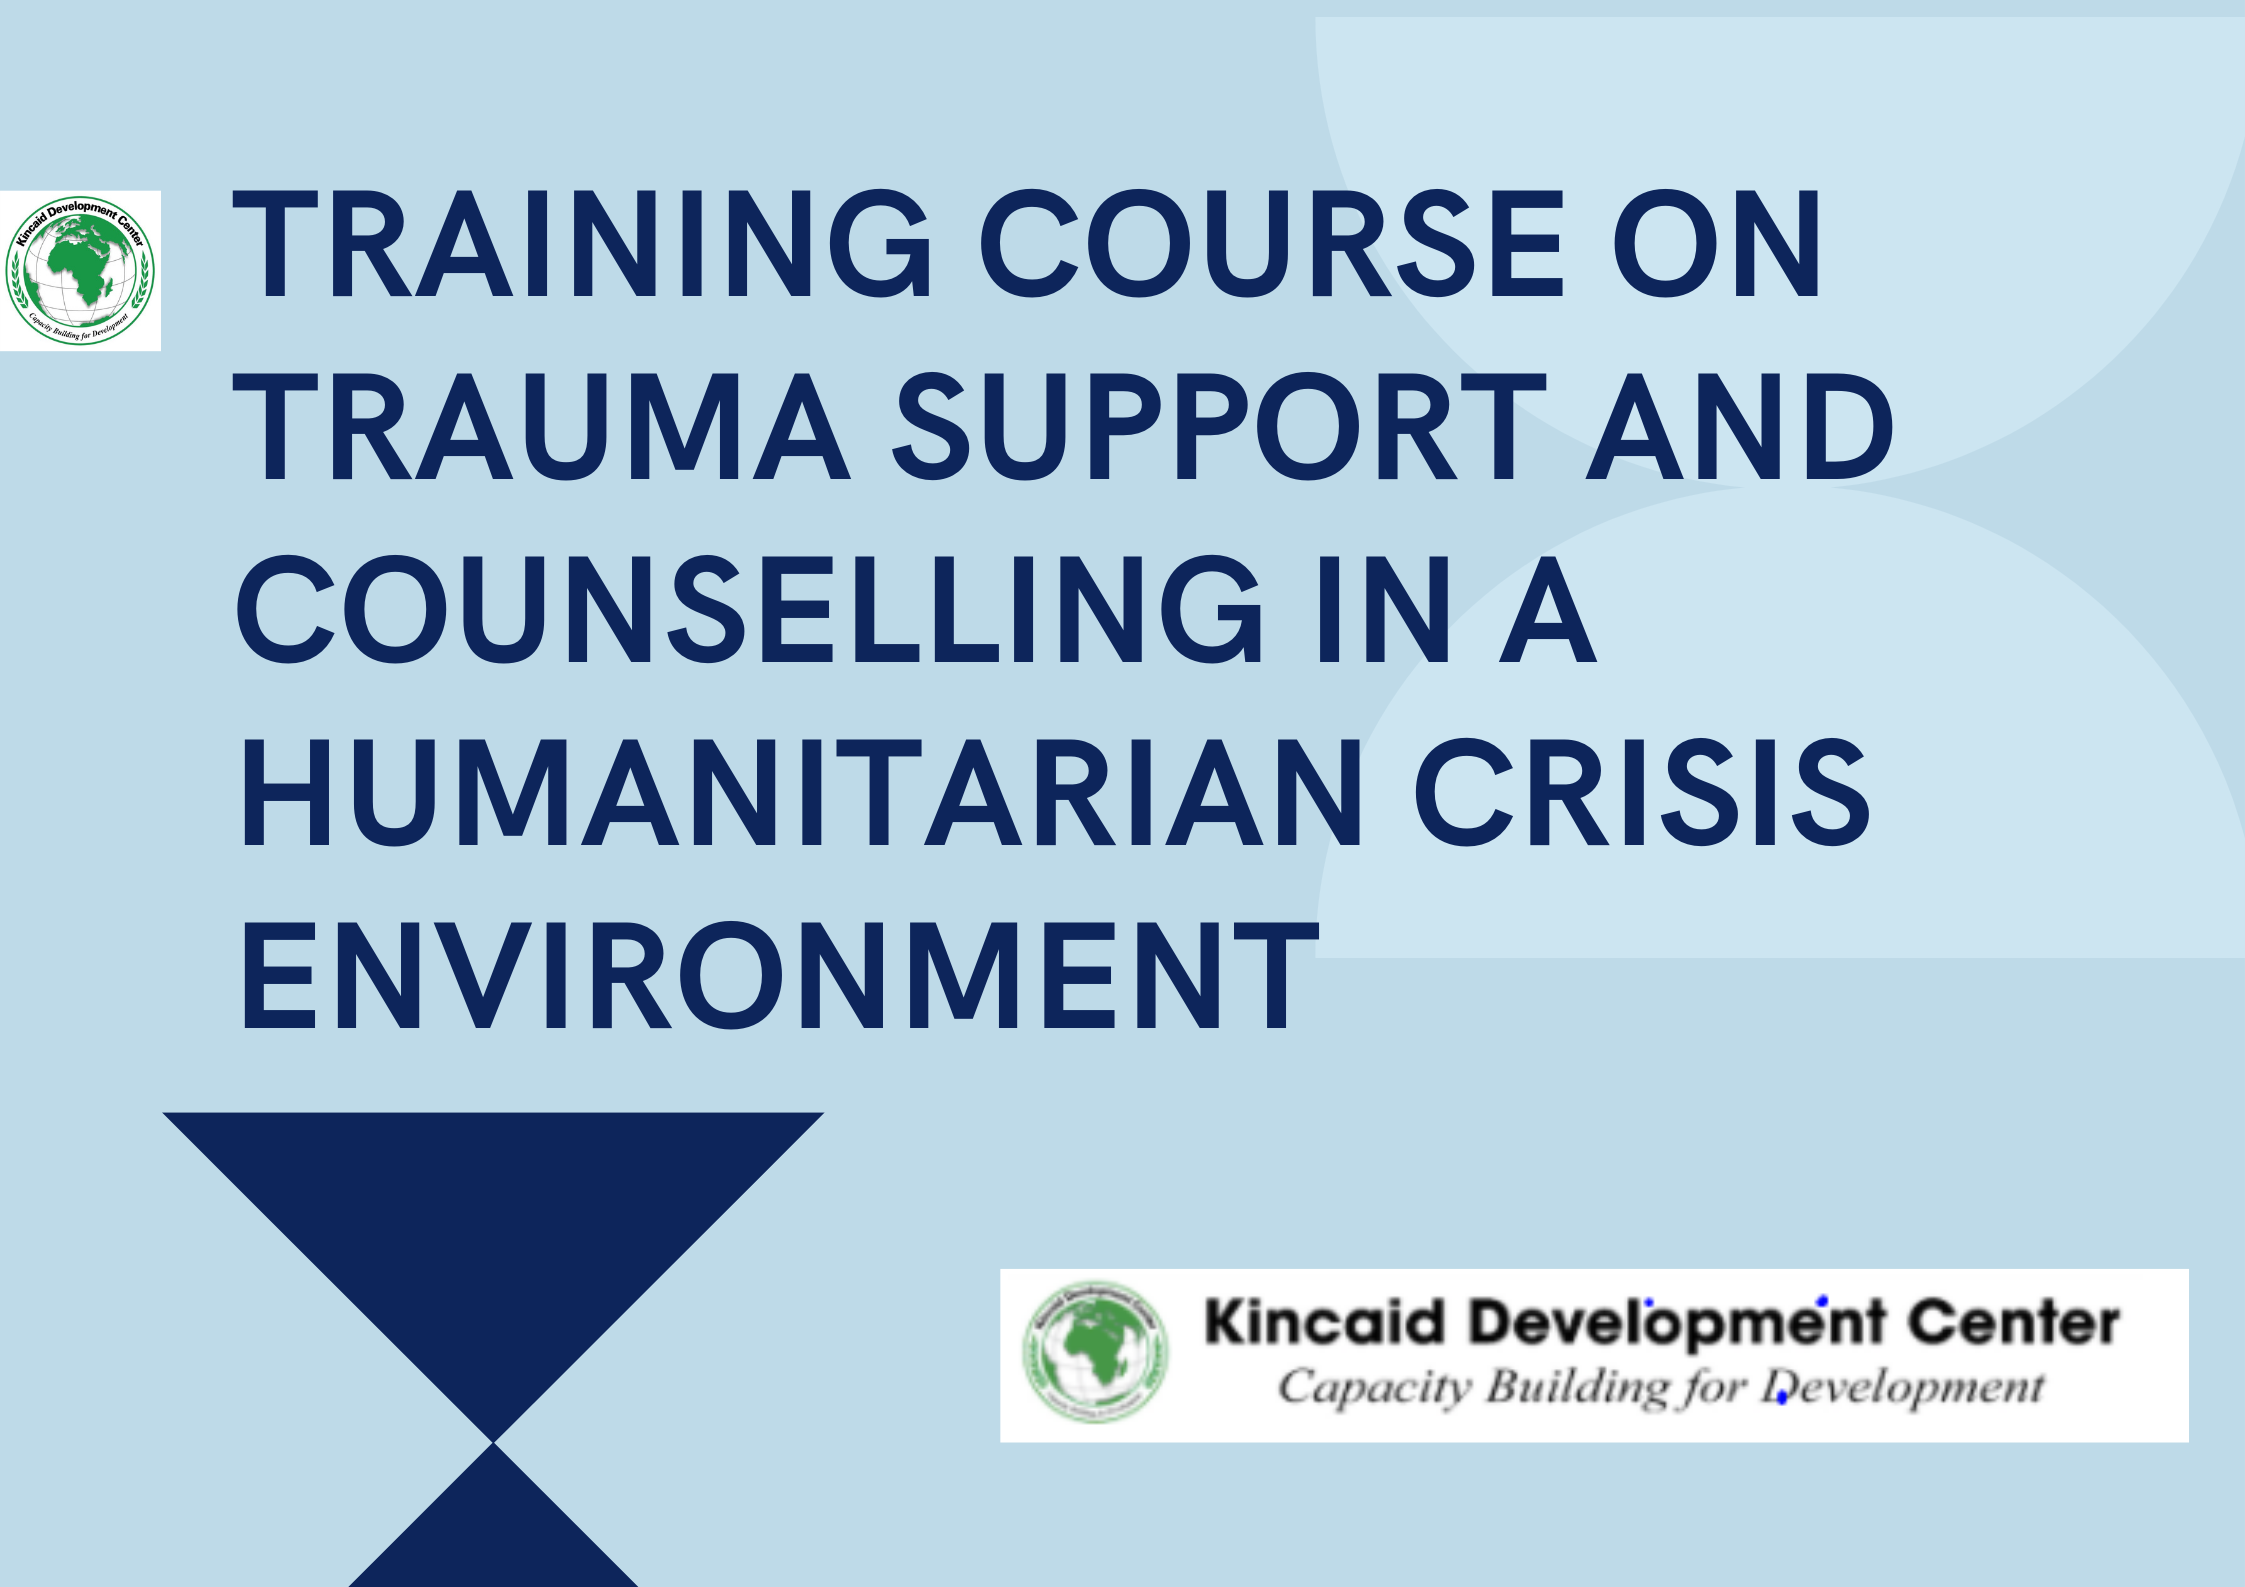 TRAINING COURSE ON TRAUMA SUPPORT AND COUNSELLING IN A HUMANITARIAN CRISIS ENVIRONMENT, Nairobi, Kenya